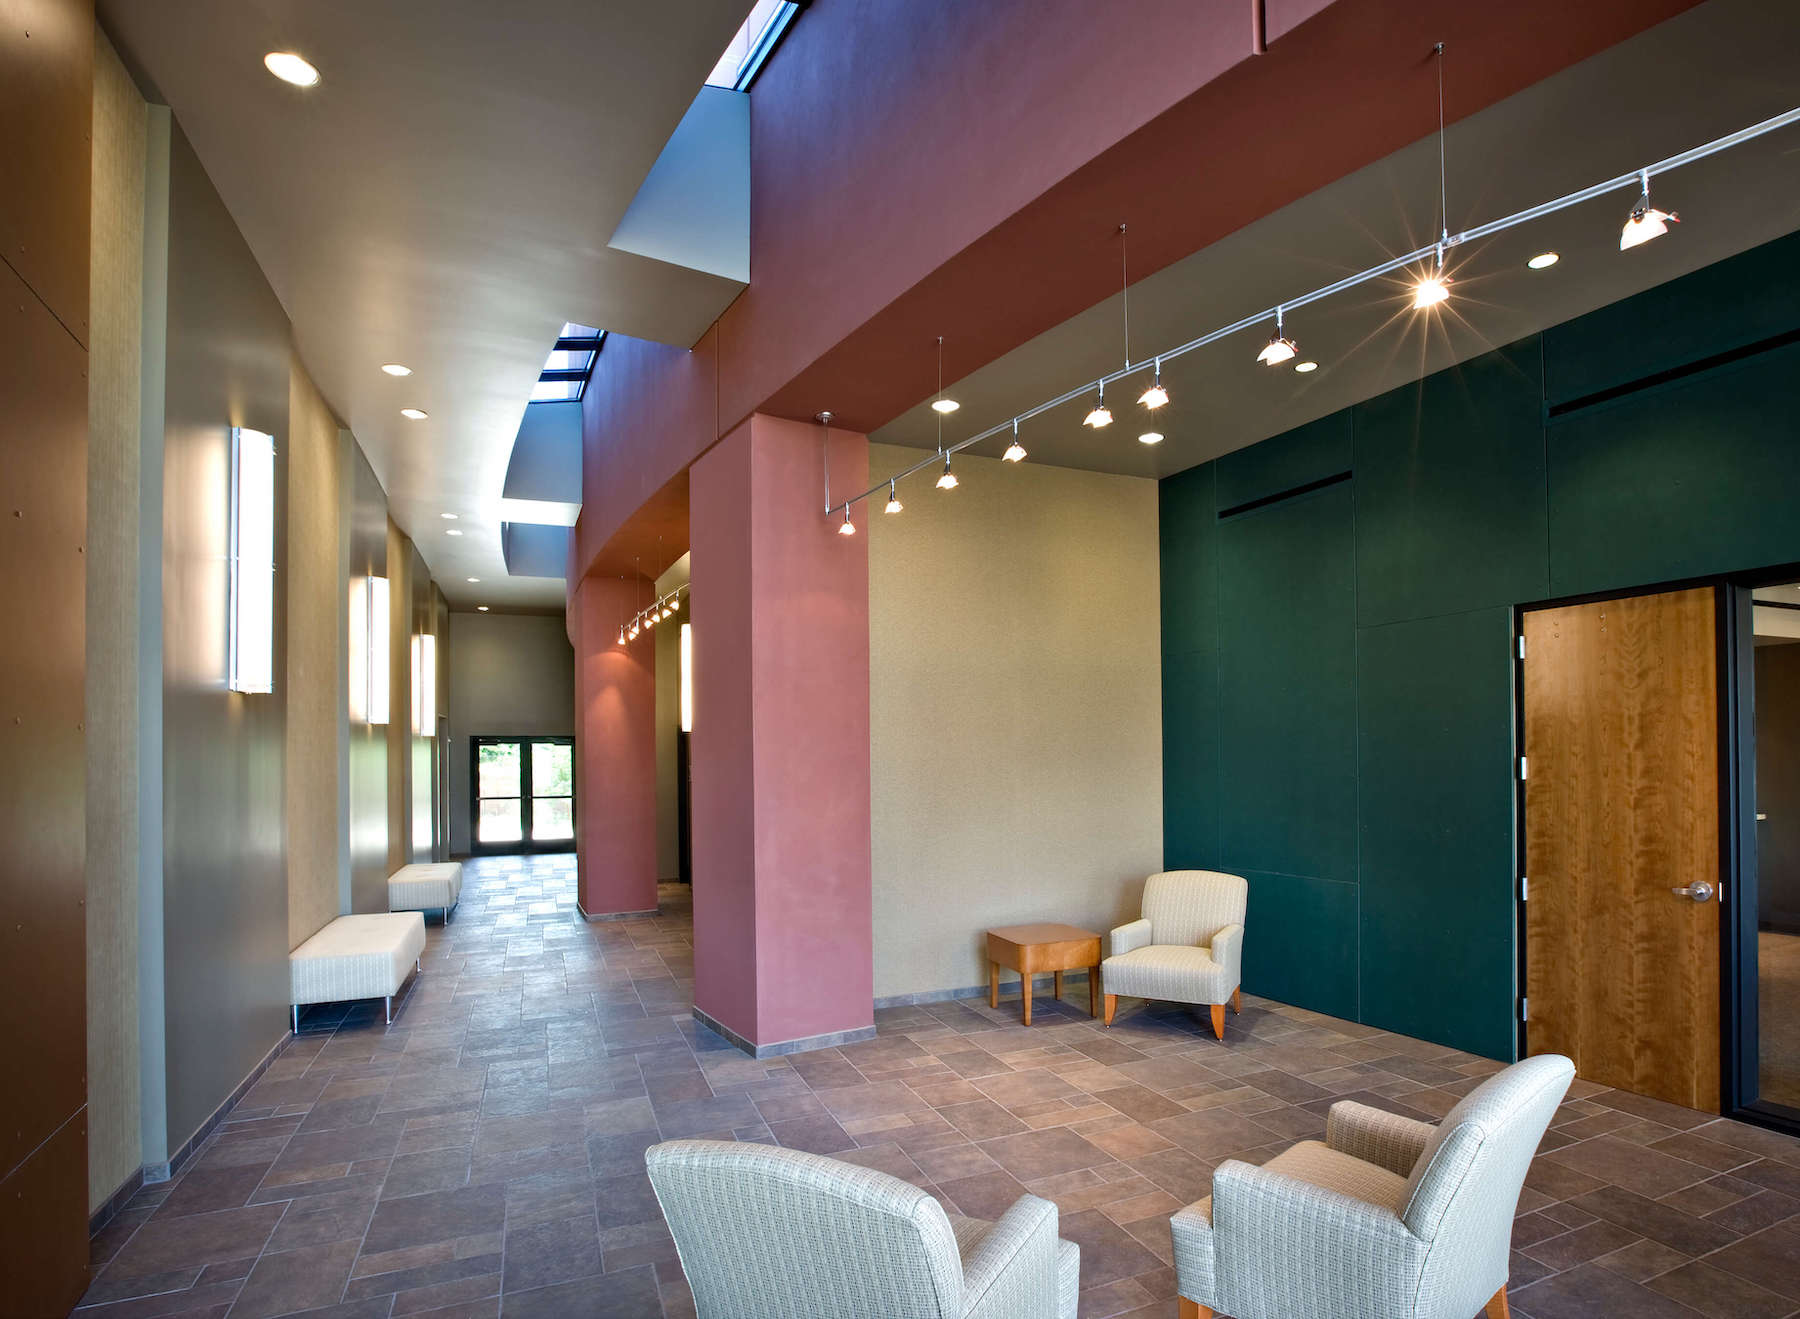 Office lobby with tile floors and a combination of cream, green and red walls.